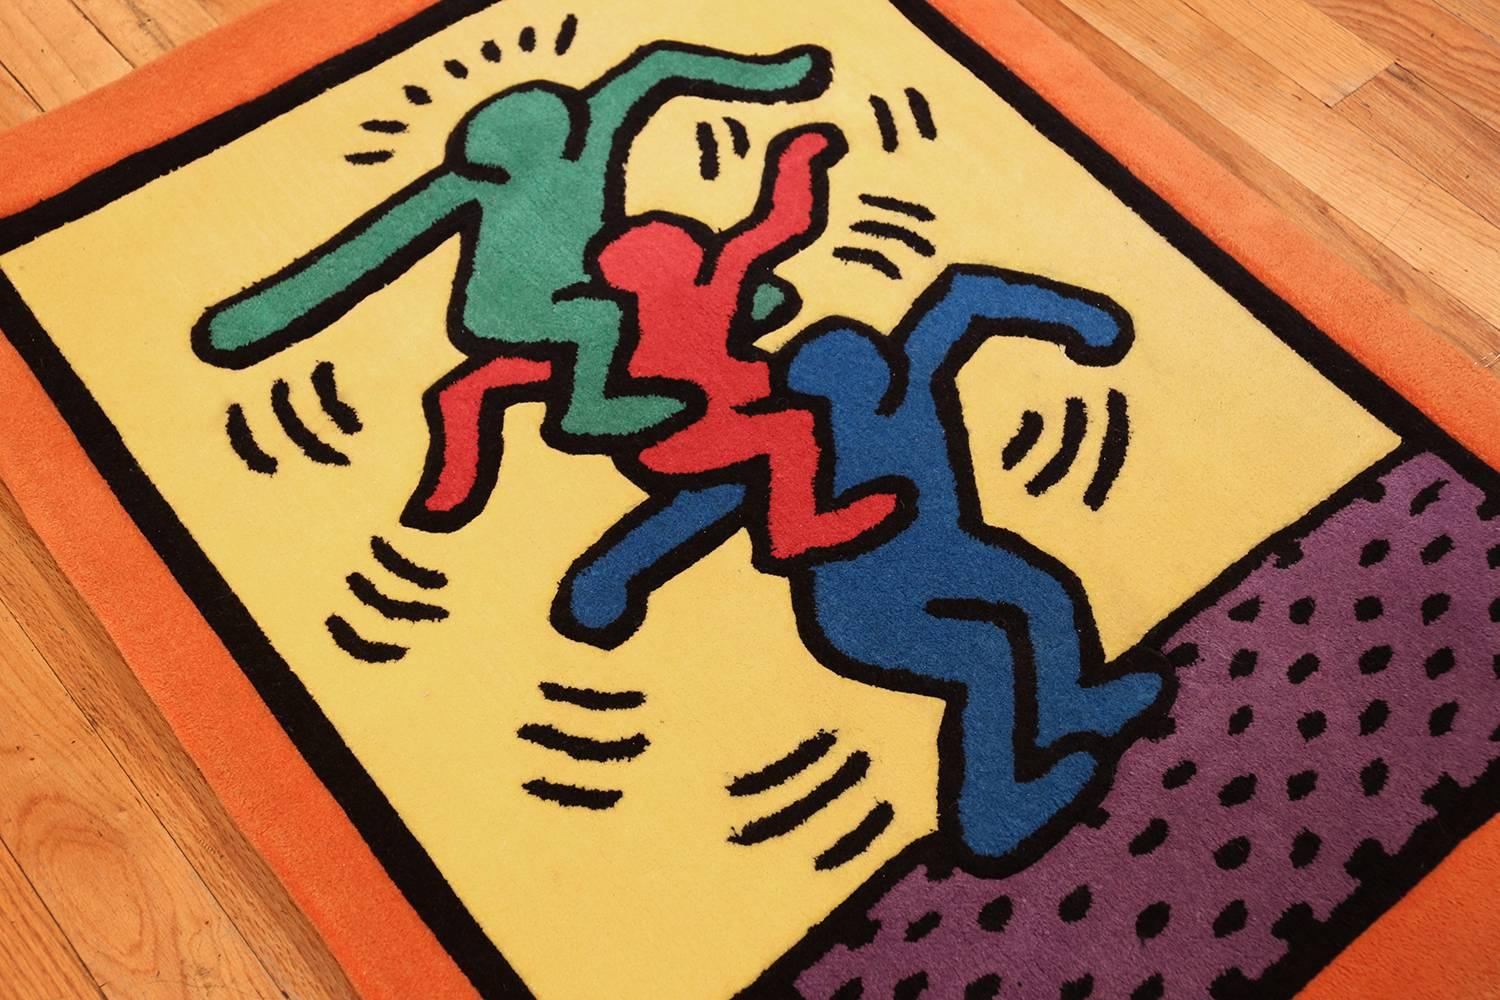 Hand-Woven Small Size Vintage American Rug Designed by Keith Haring. Size: 3 ft x 4 ft 